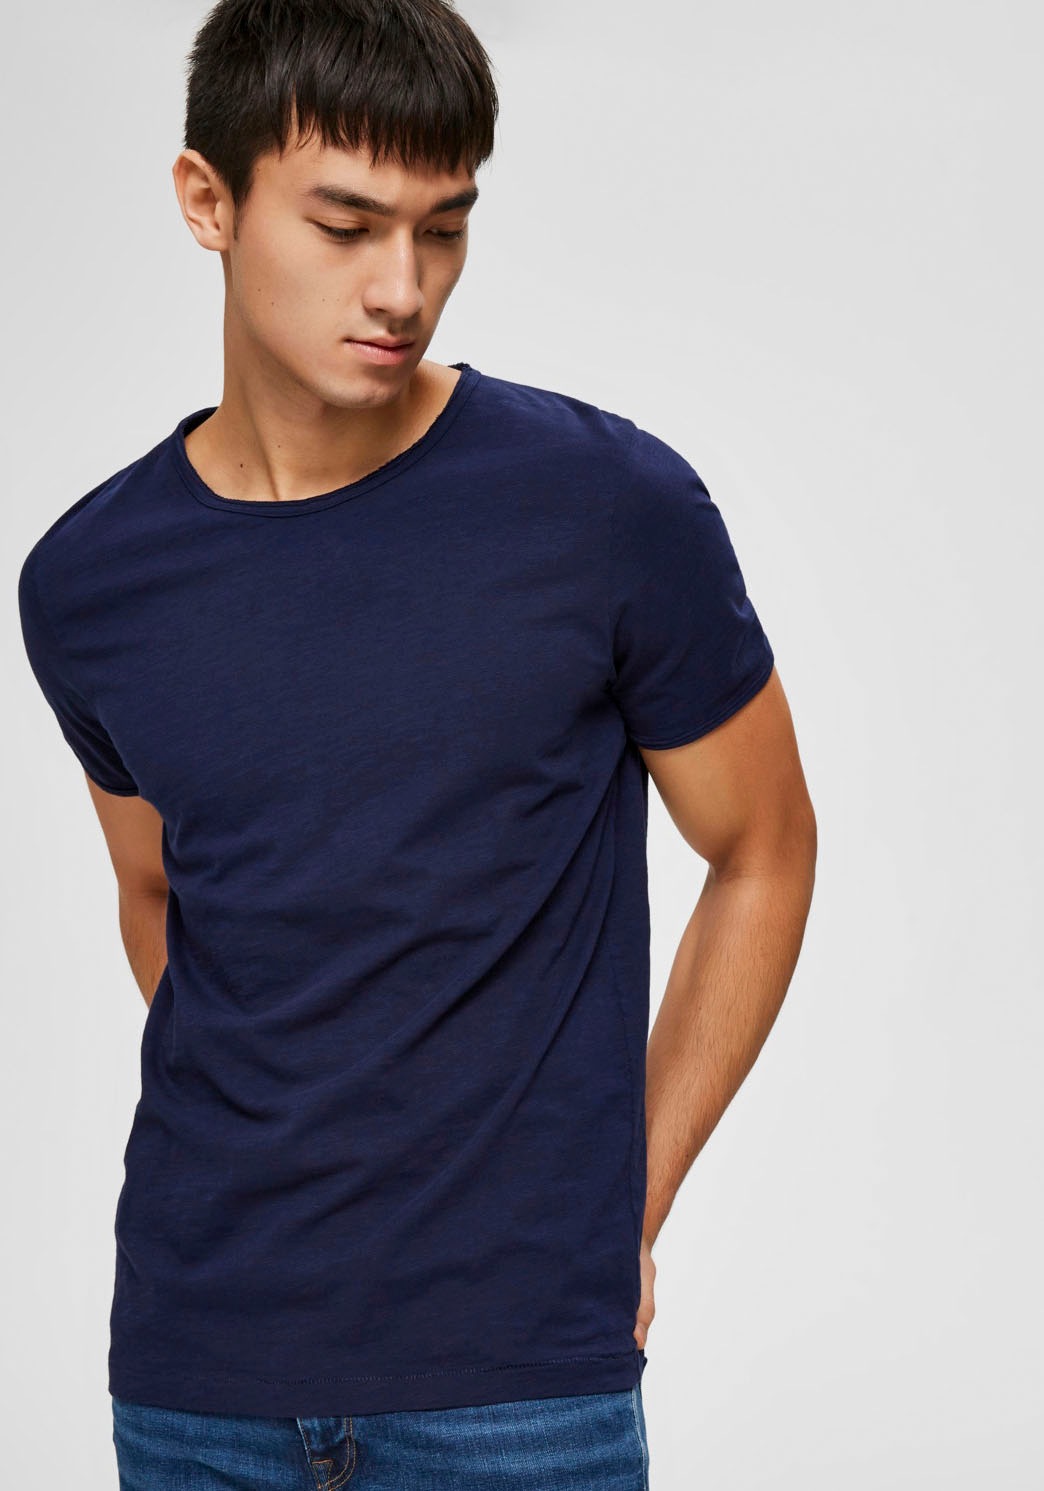 T-Shirt »MORGAN OTTO SELECTED online O-NECK TEE« kaufen bei HOMME